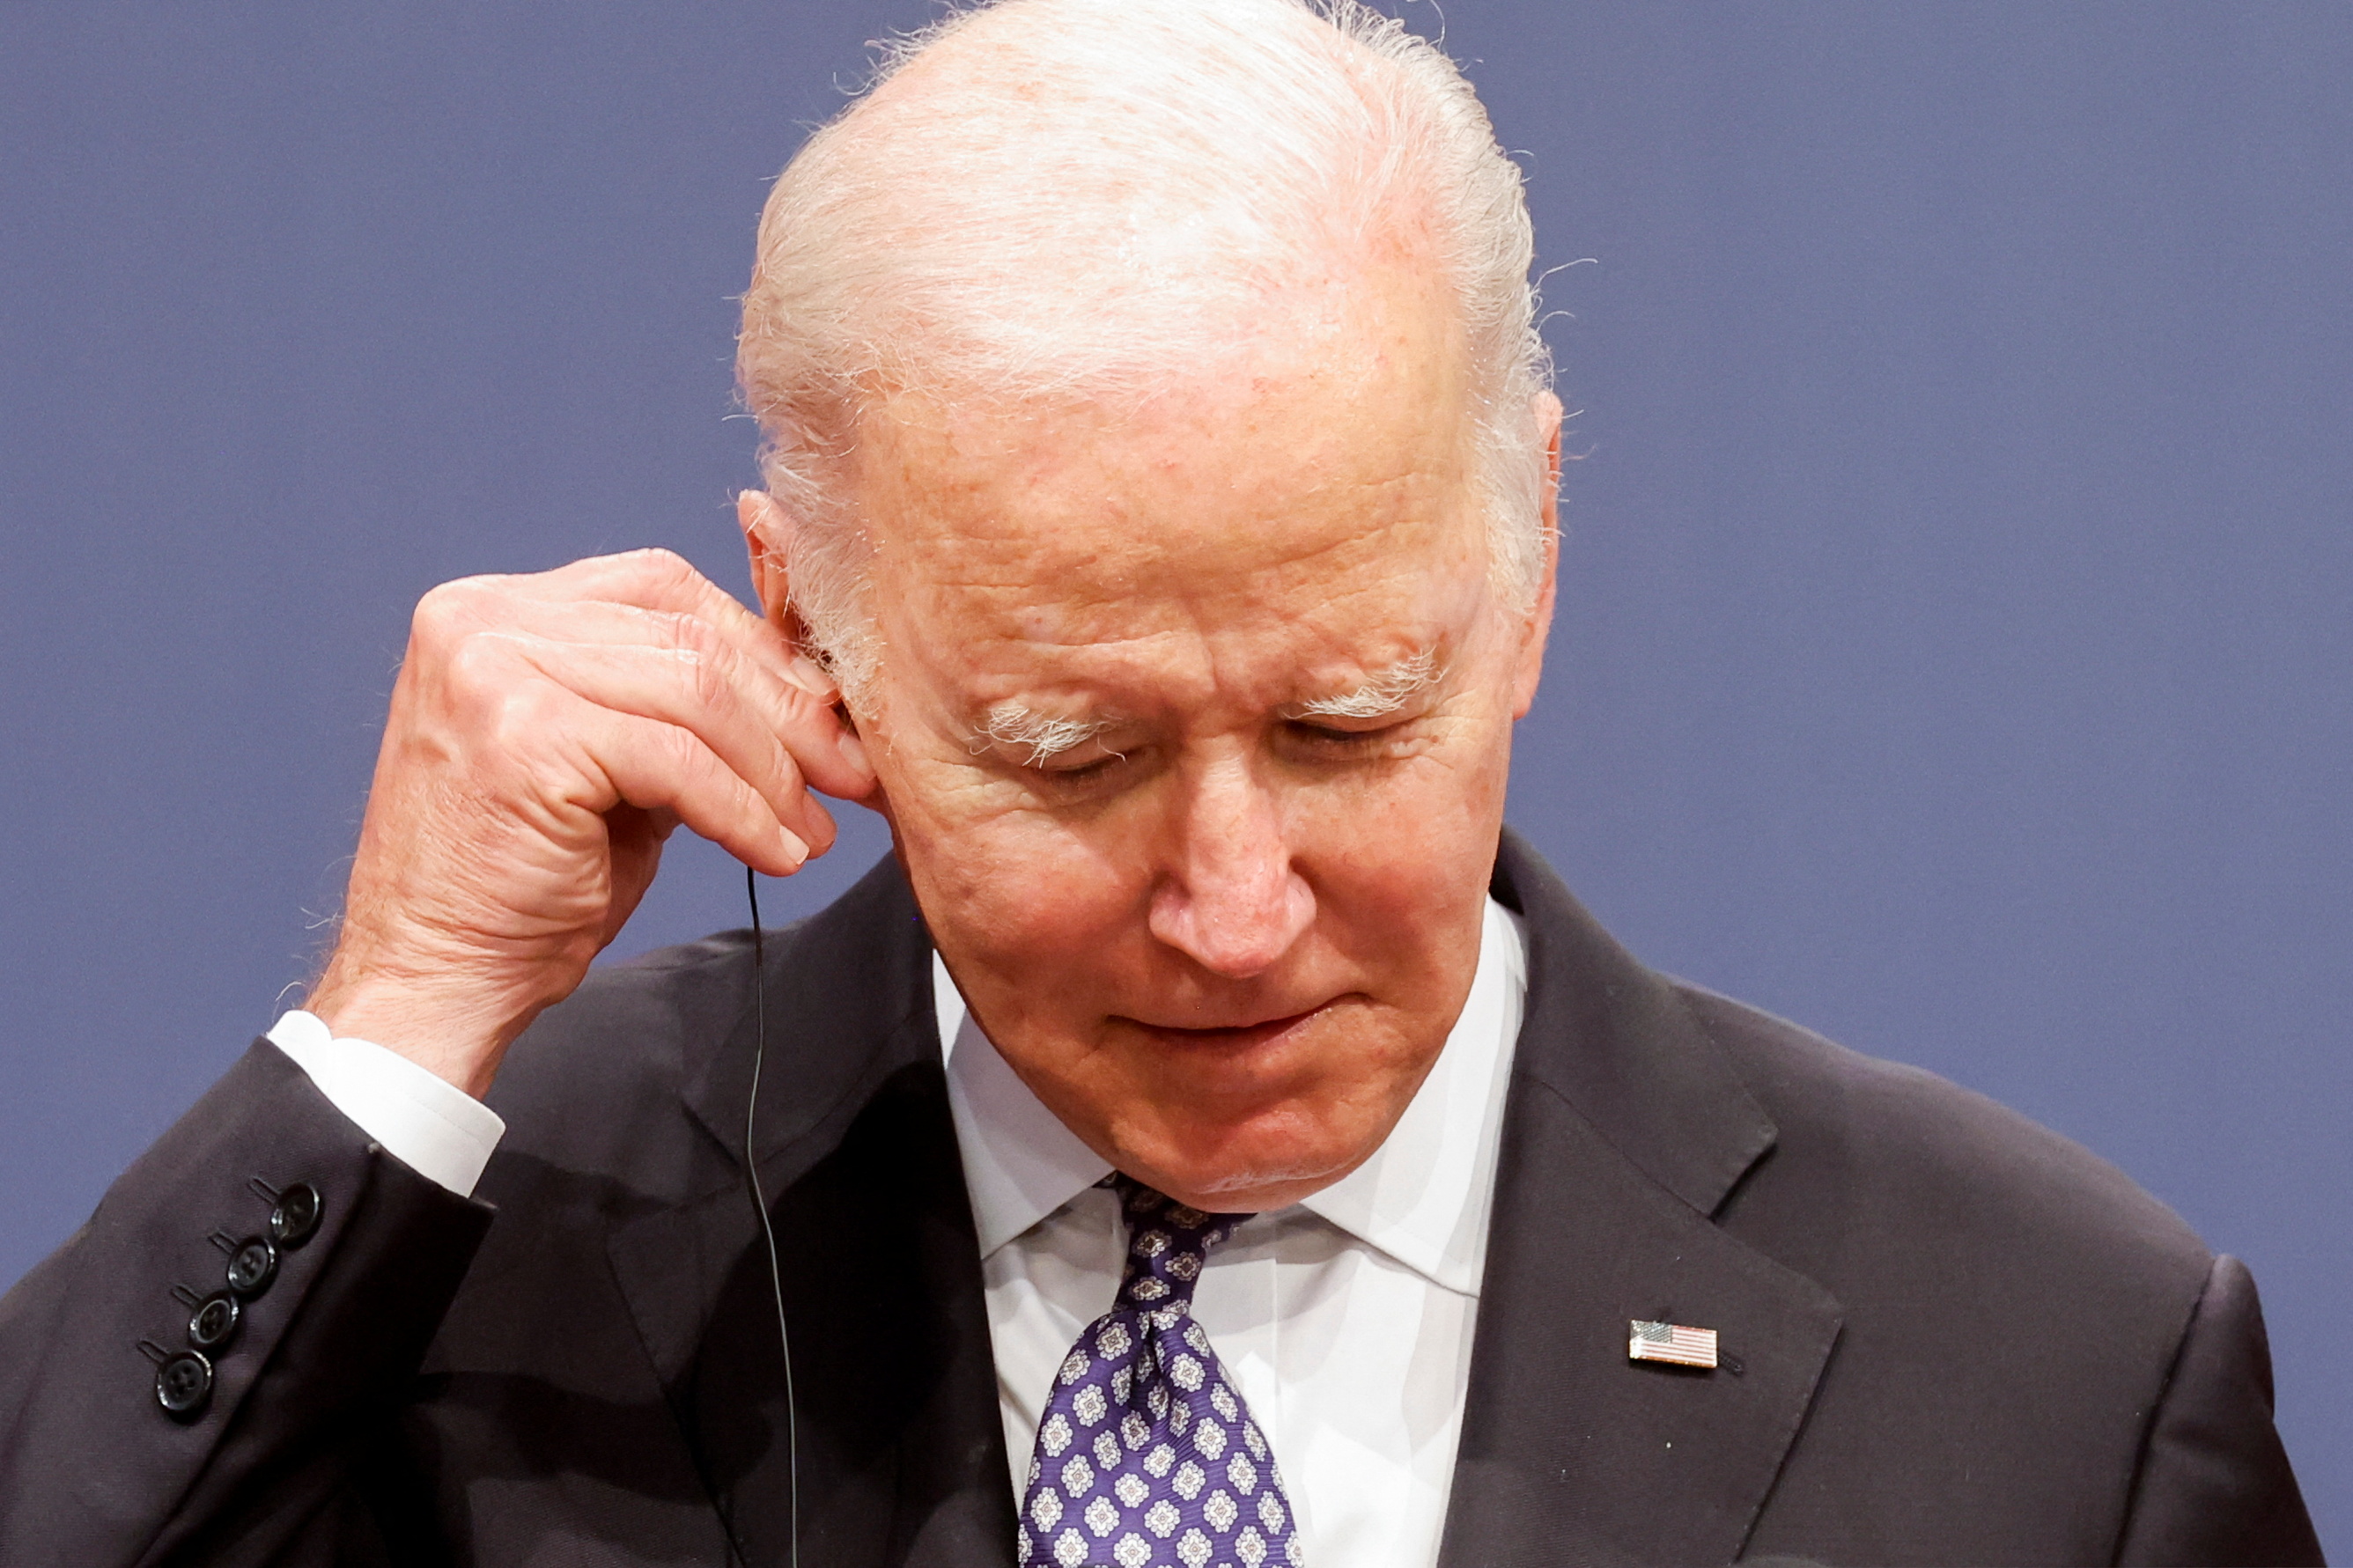 U.S. President Joe Biden adjusts his earpiece during a joint news conference with South Korean President Yoon Suk-youl (not pictured) at the People's House in Seoul, South Korea, May 21, 2022. REUTERS/Jonathan Ernst